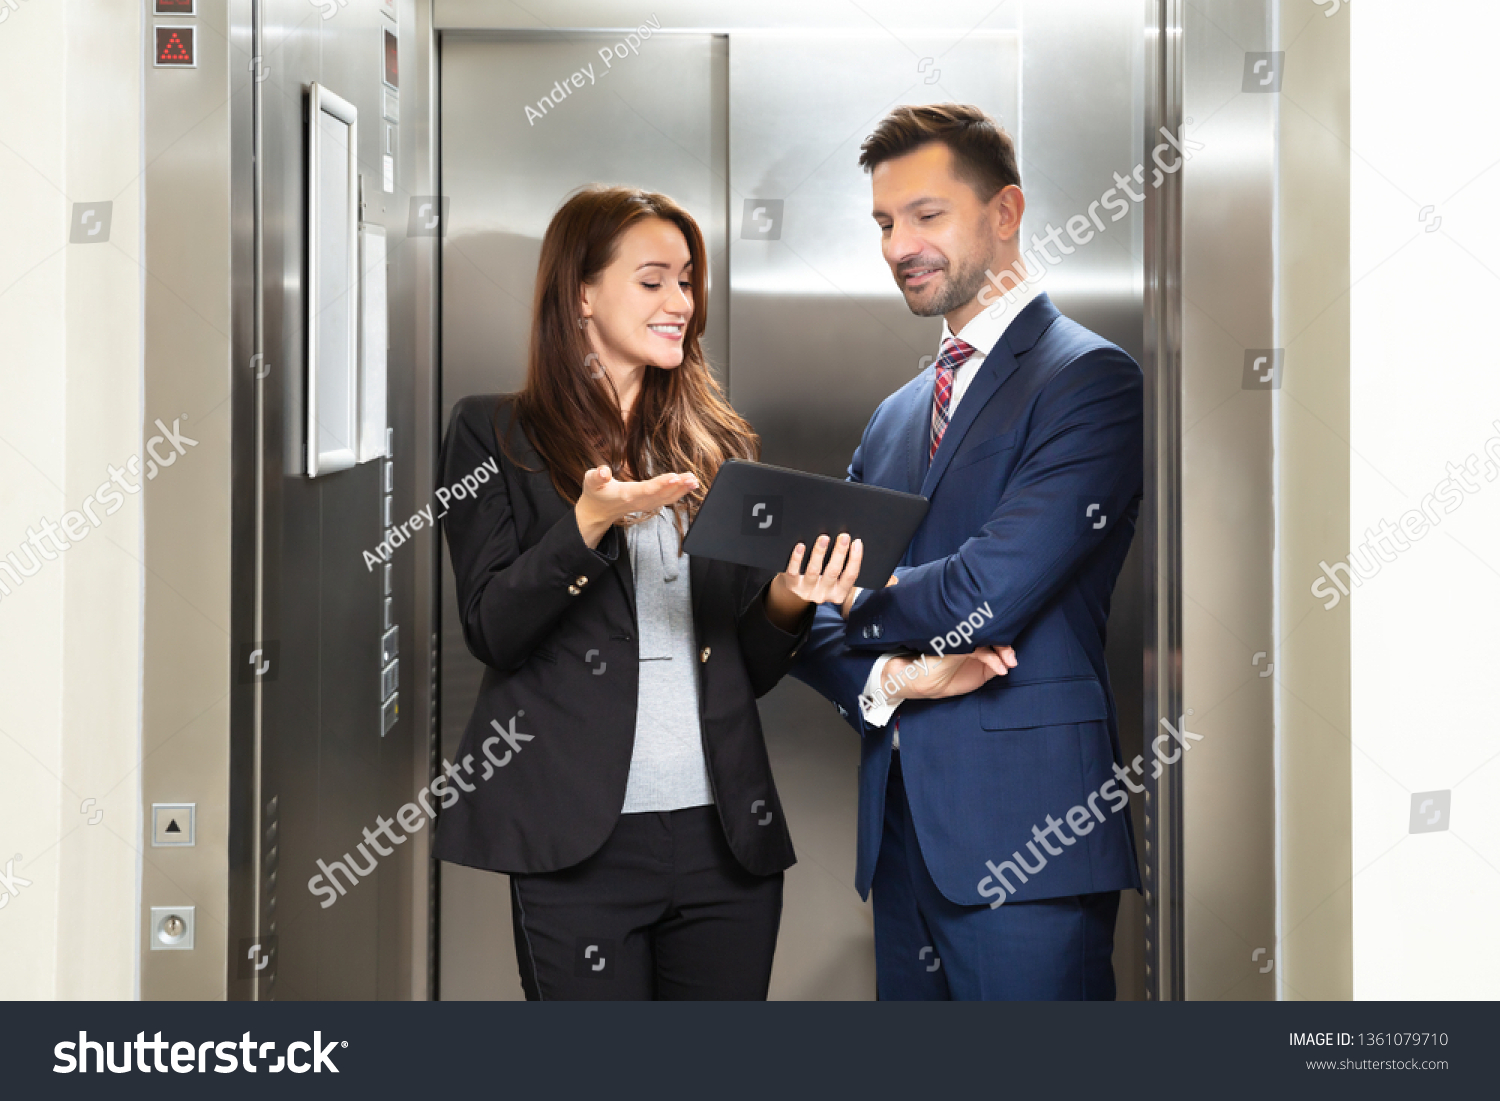 Smiling Young Businesswoman And Businessman Discussing While Using Digital Tablet Standing Near Elevator #1361079710